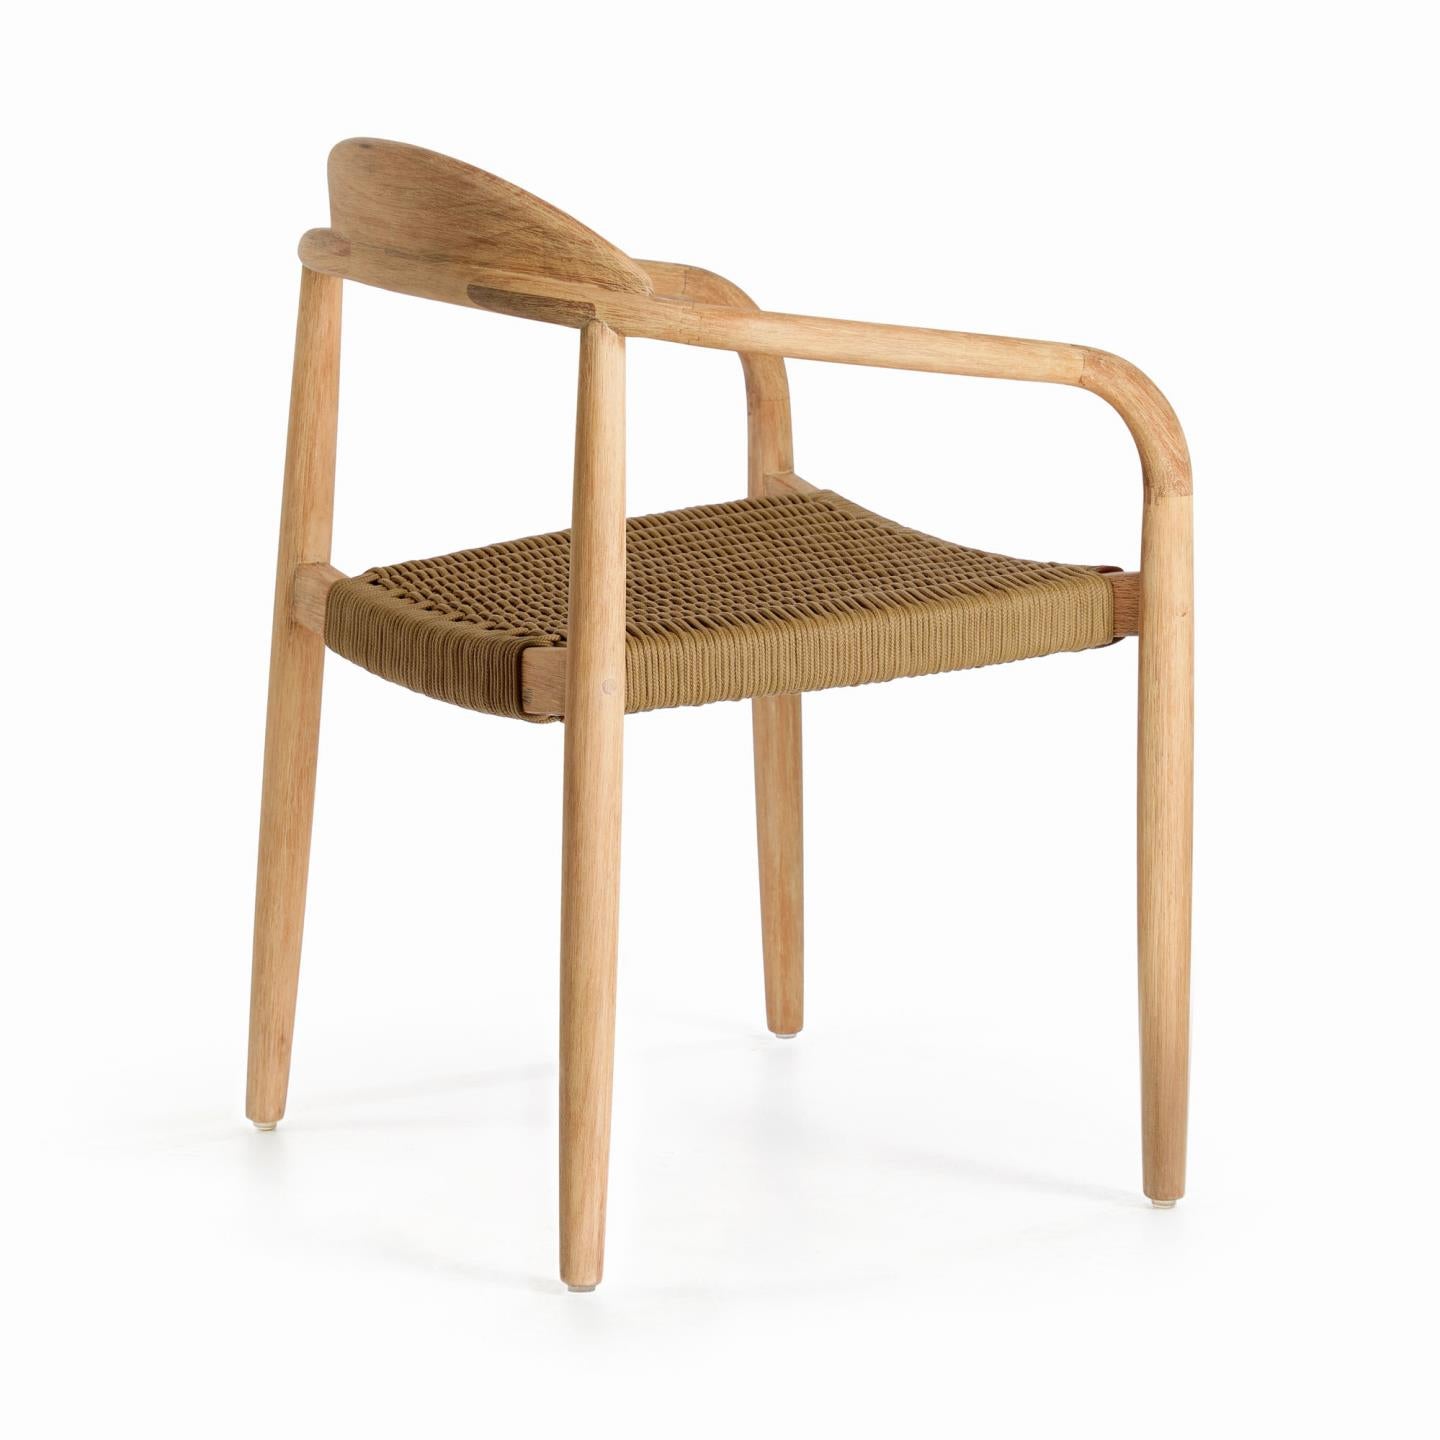 Nina stackable chair in solid acacia wood and beige rope seat